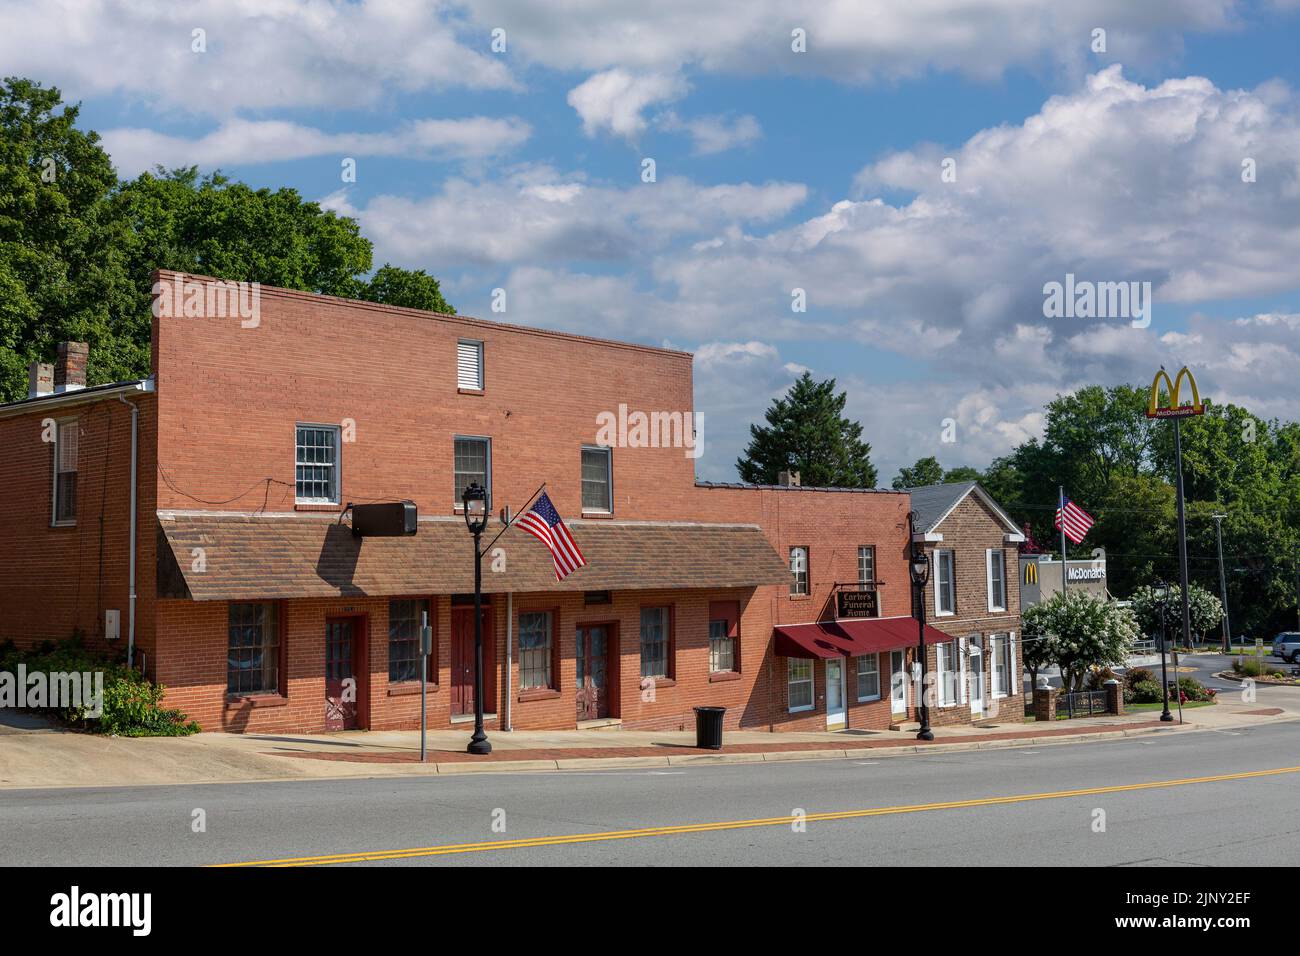 Small town of Clarksville in Virginia state. Mixed row of businesses along the main street. Stock Photo